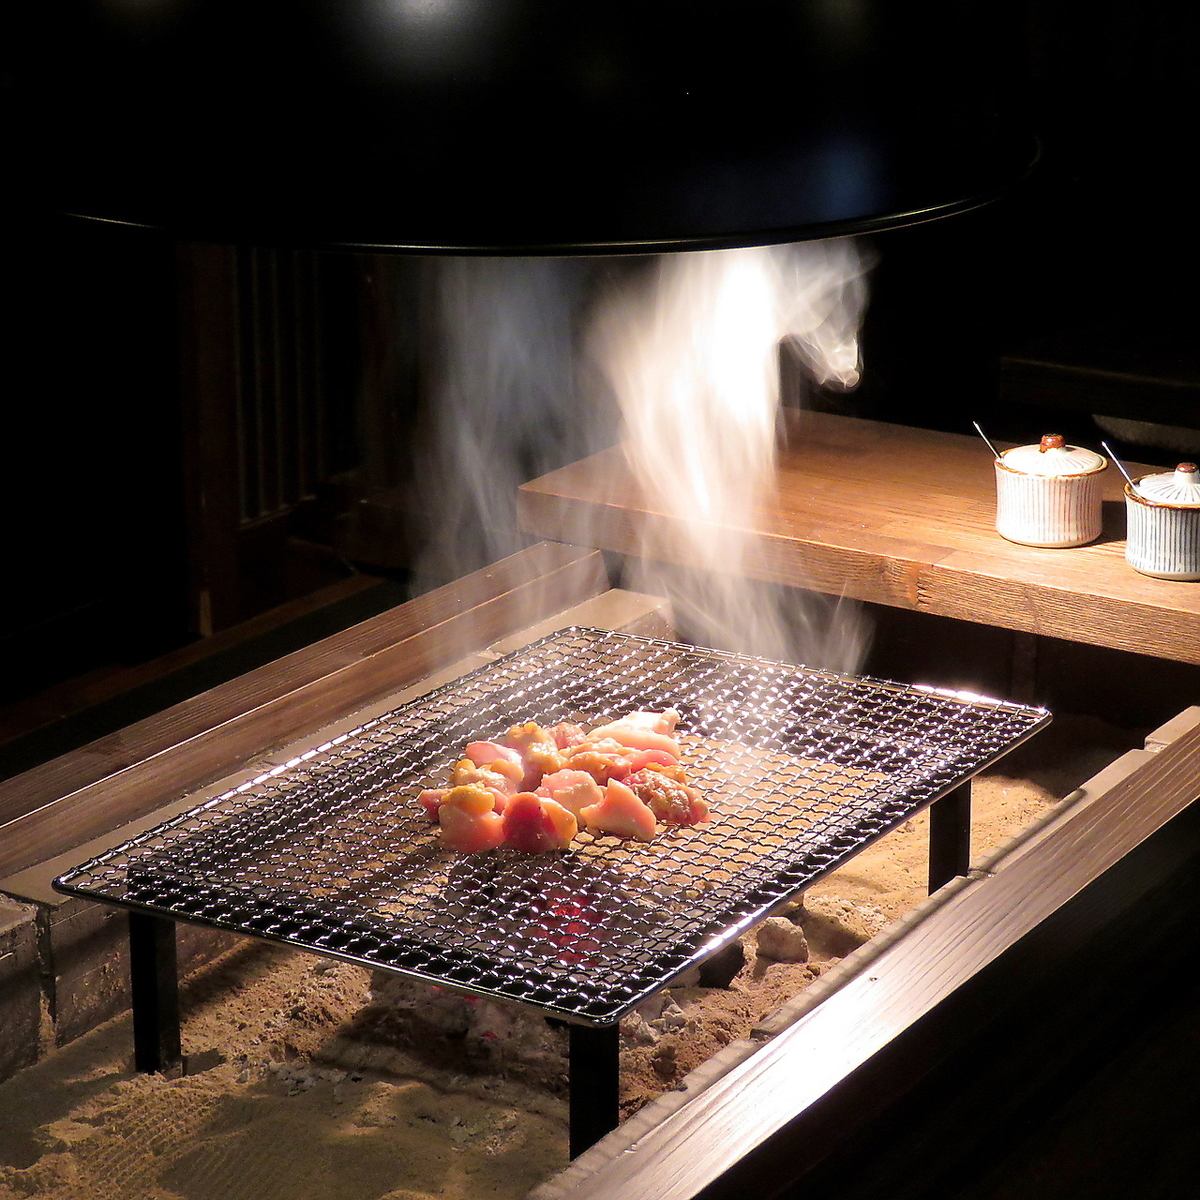 A charcoal-grilled yakiniku restaurant where you can enjoy yourself around the hearth